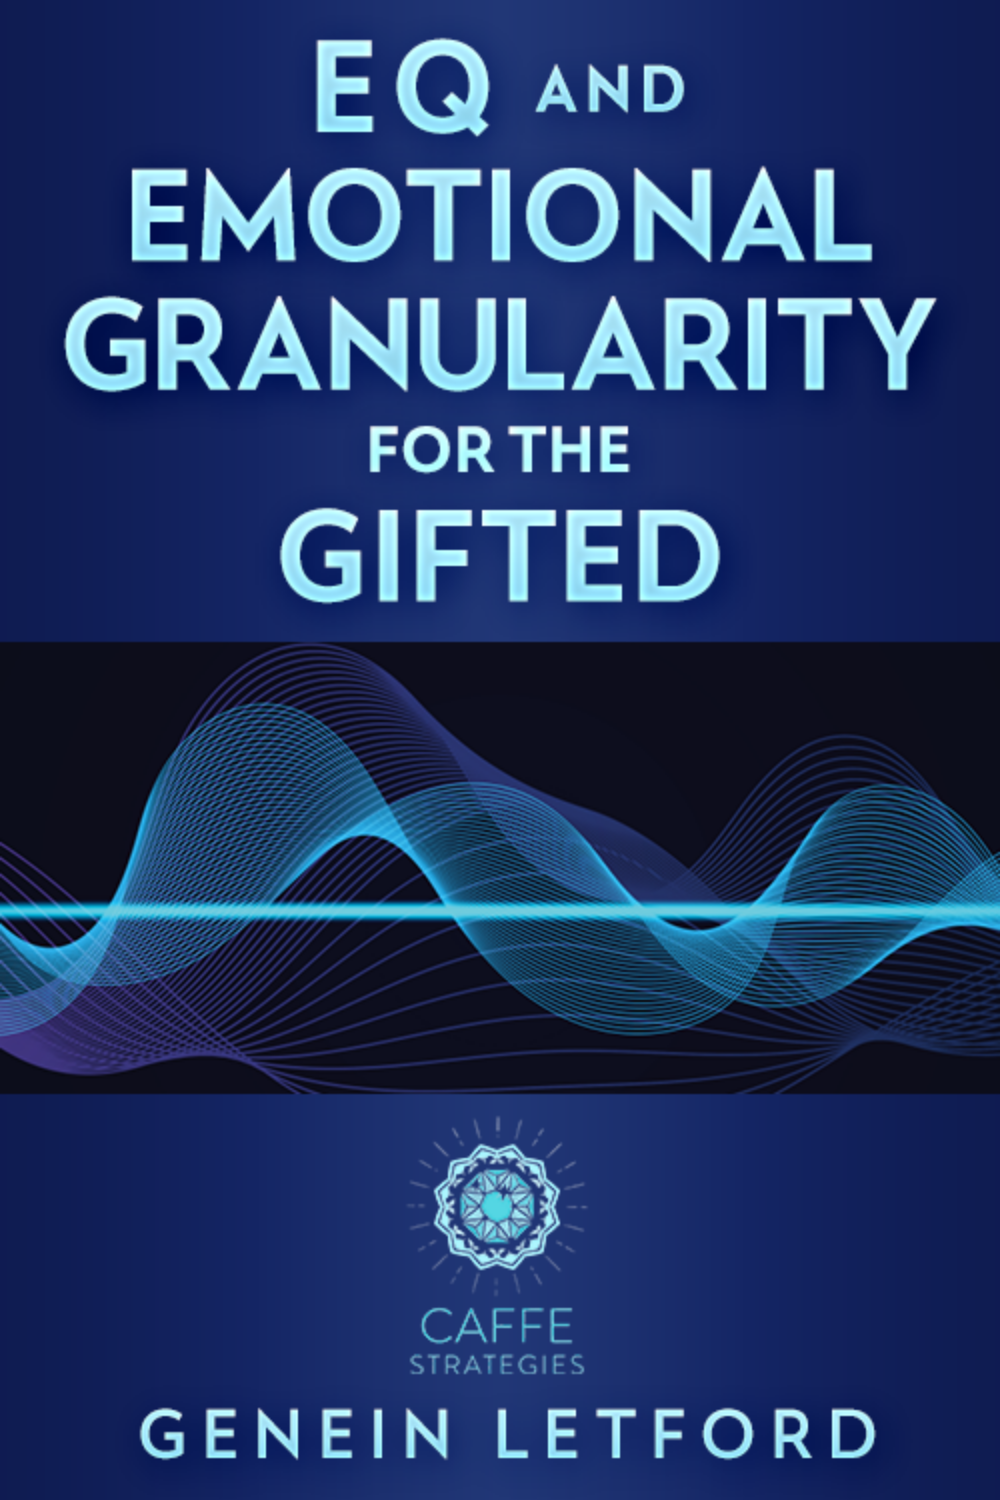 EQ and Emotional Granularity for the Gifted